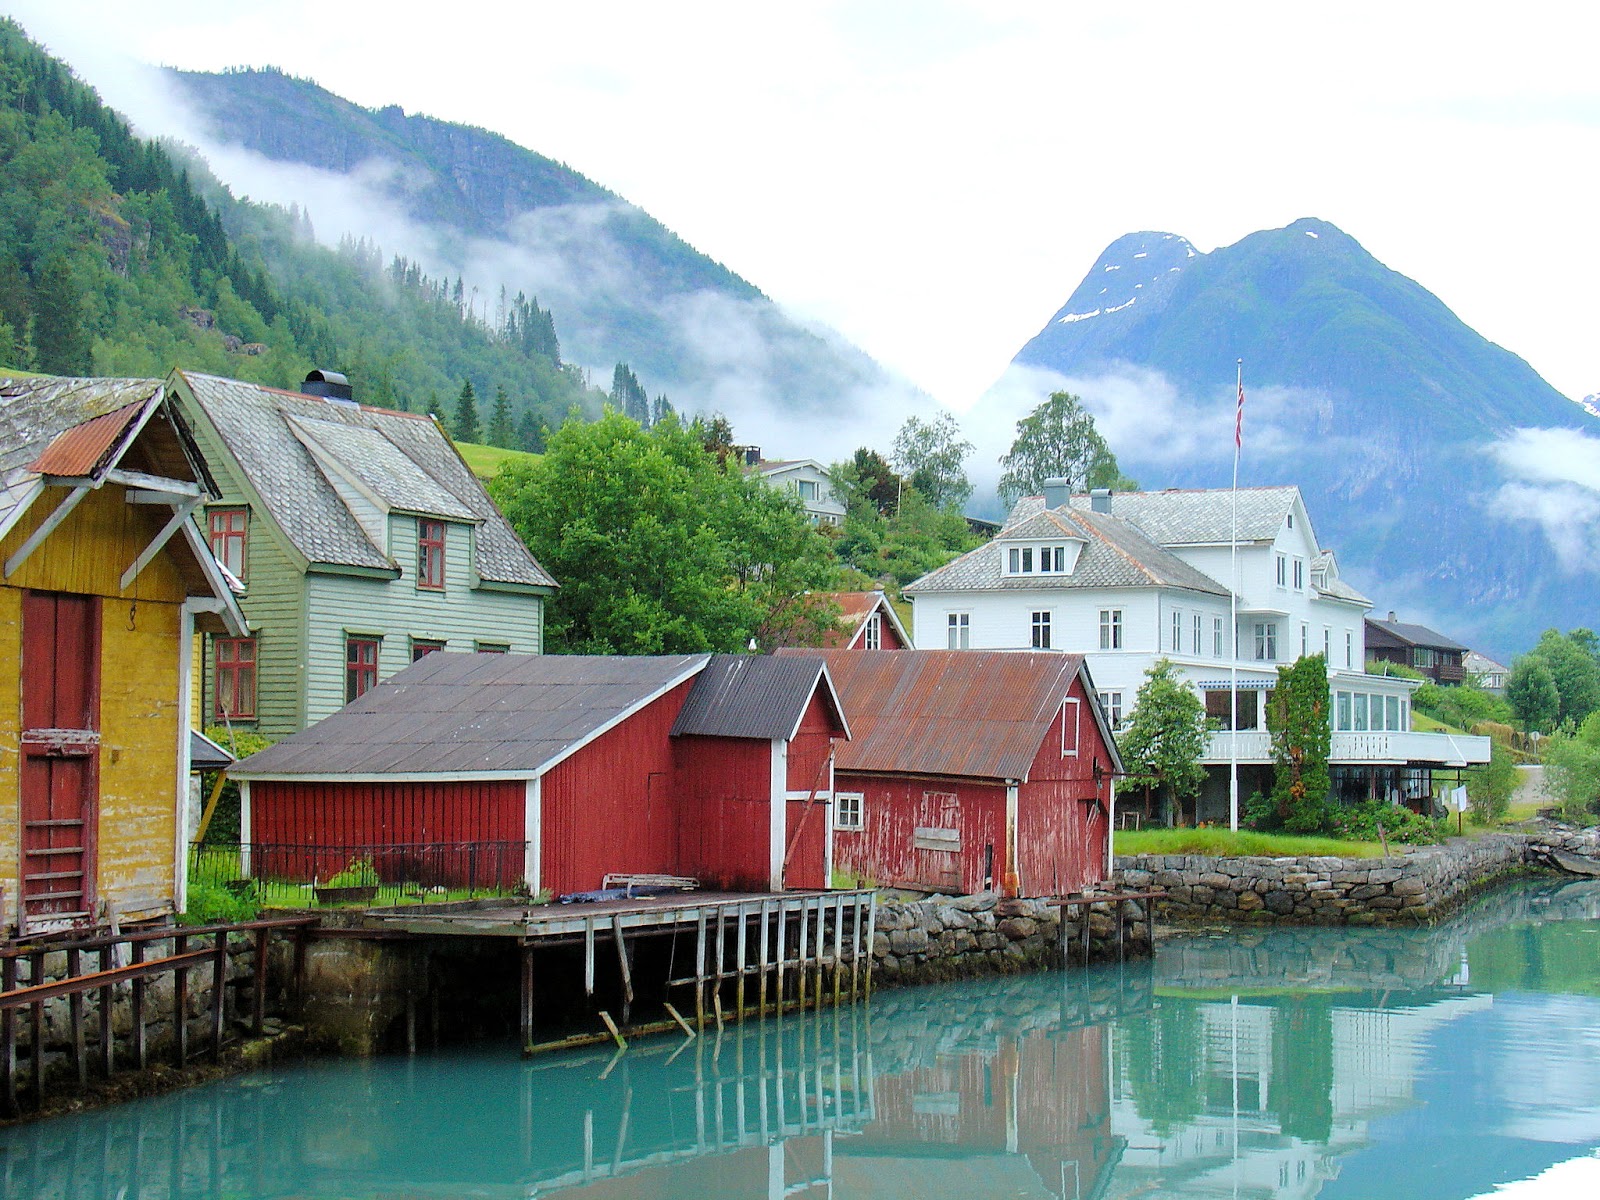 Welcome to Fjærland, Norway, one of the most charming and picturesque ports in Norway. The Fjordstuer Hotel can be seen in the background.